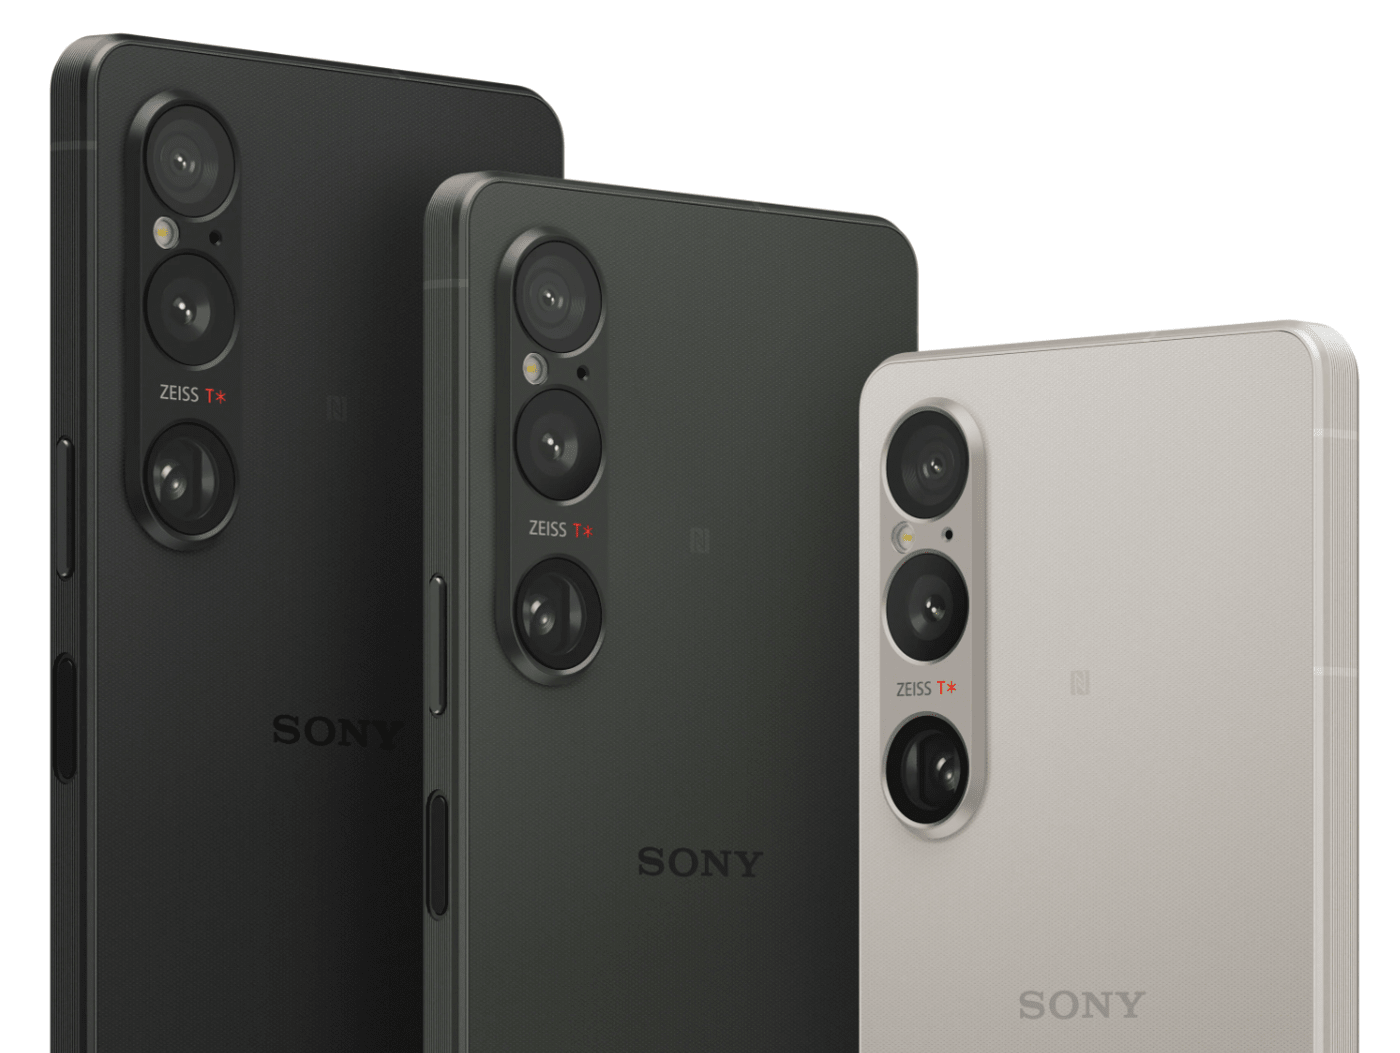 Sony’s new smartphone could entice shutterbugs away from Apple and Google